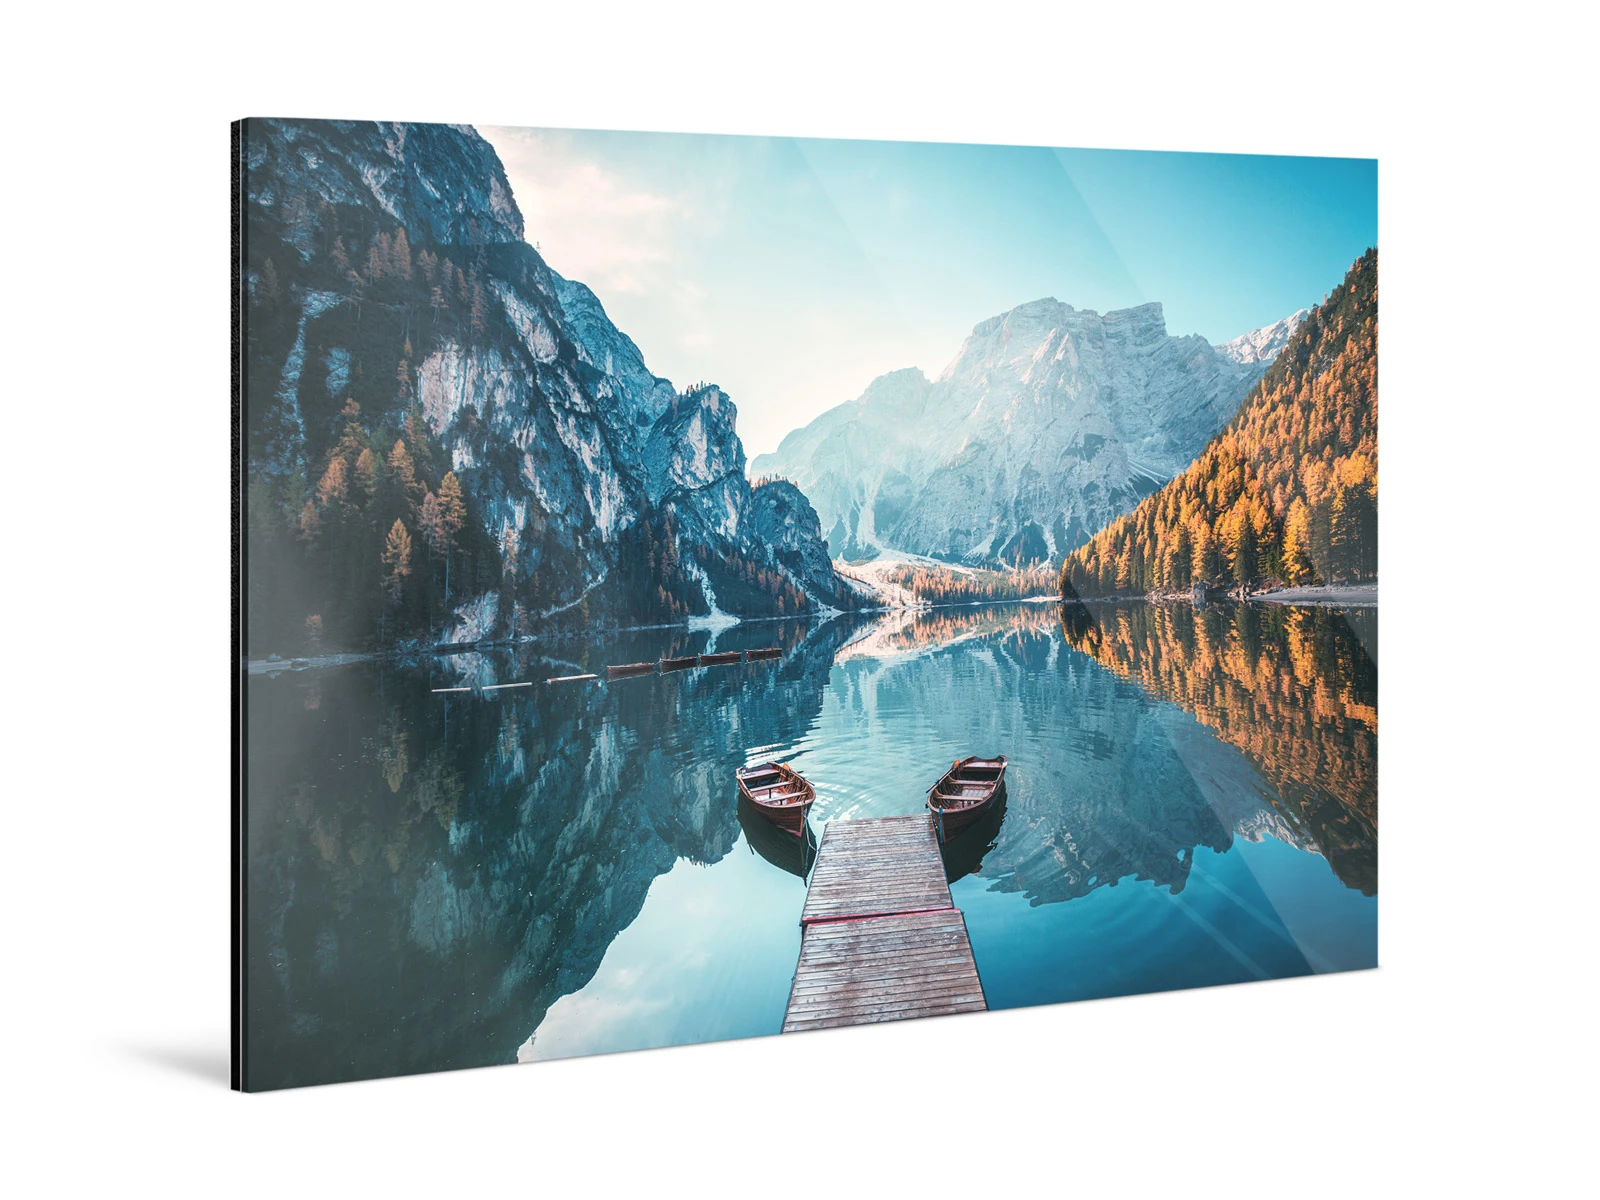 Jetty with two adjacent boats in a reflecting mountain lake as original photo print under acrylic glass.